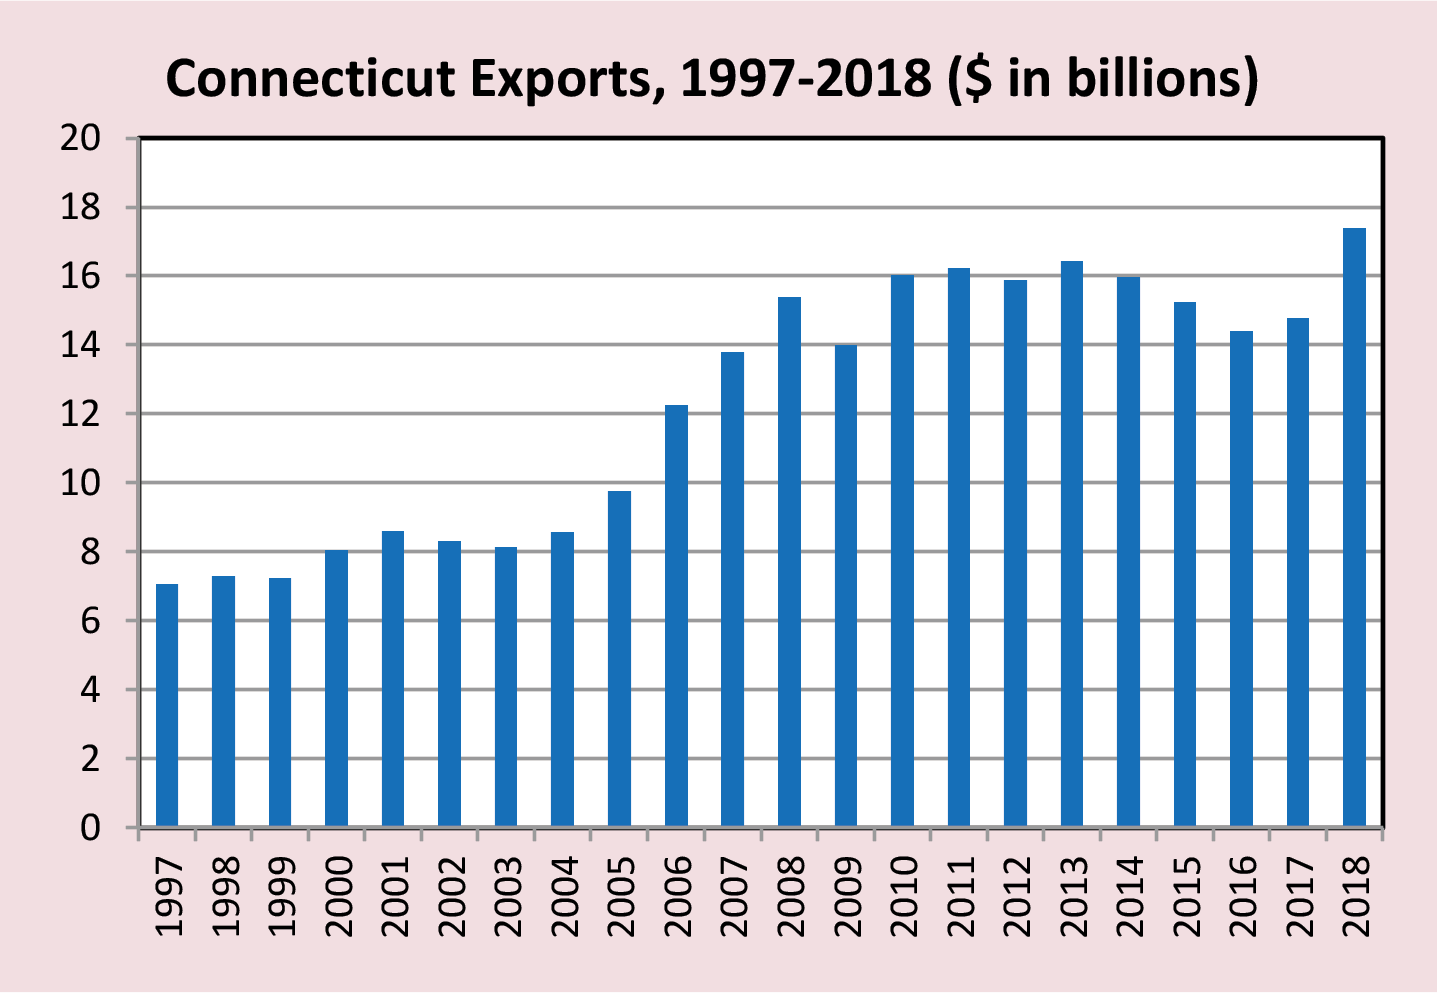 Chart 1. Connecticut Exports, 1997-2018 ($ in billions)